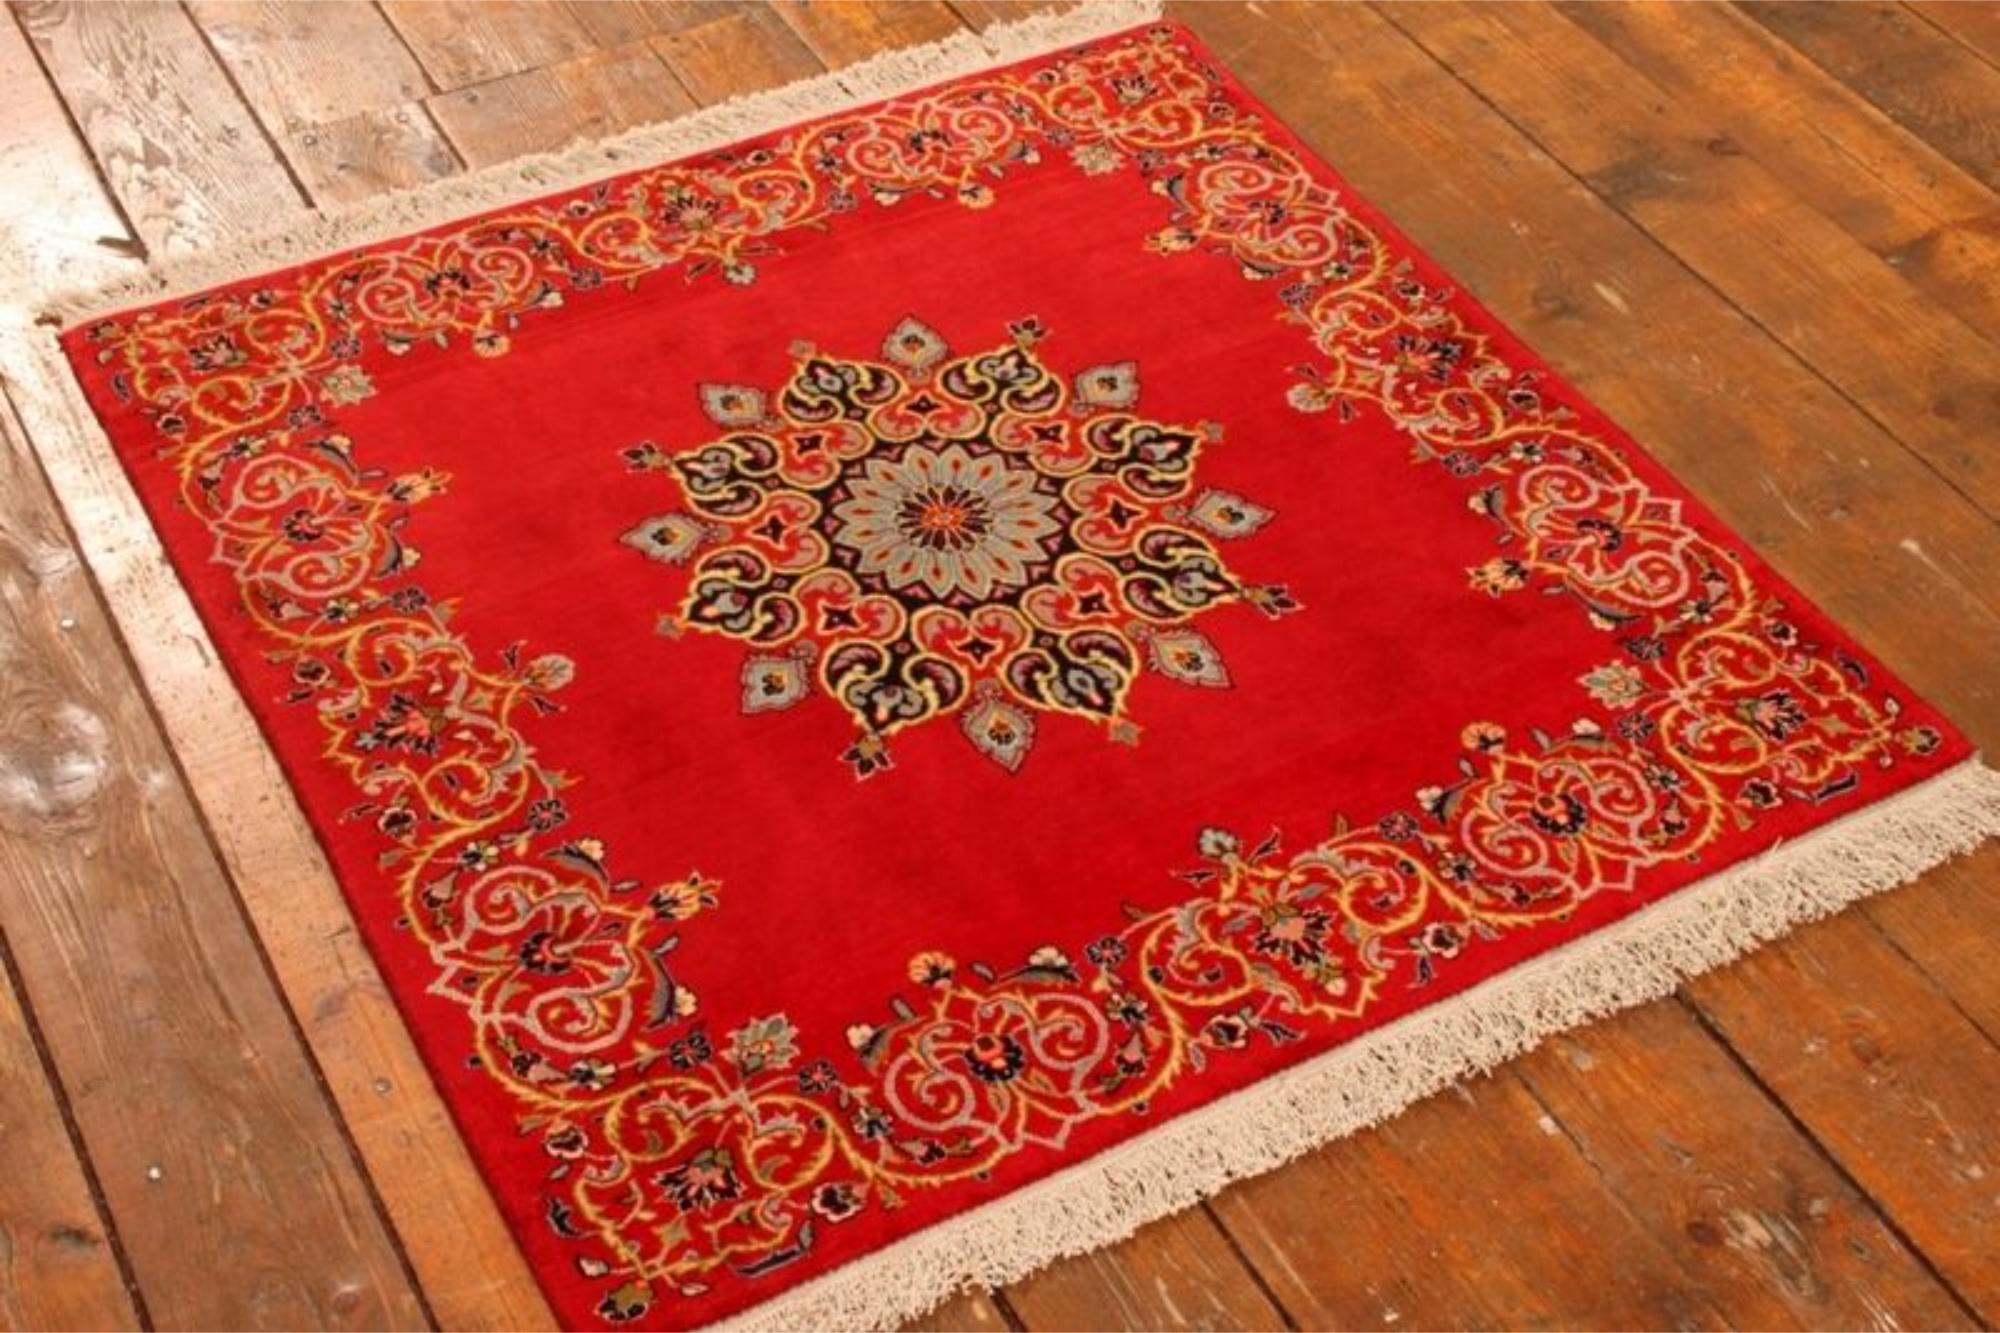 Handmade Vintage Persian Style Kashan Square Rug

Dimensions: 3.1’ x 3.6’ (approximately 94.49 cm x 109.73 cm)
Material: 100% Wool
Era: 1970s
Condition: Good

Embrace the elegance of this handmade Kashan square rug, a vintage piece from the 1970s.